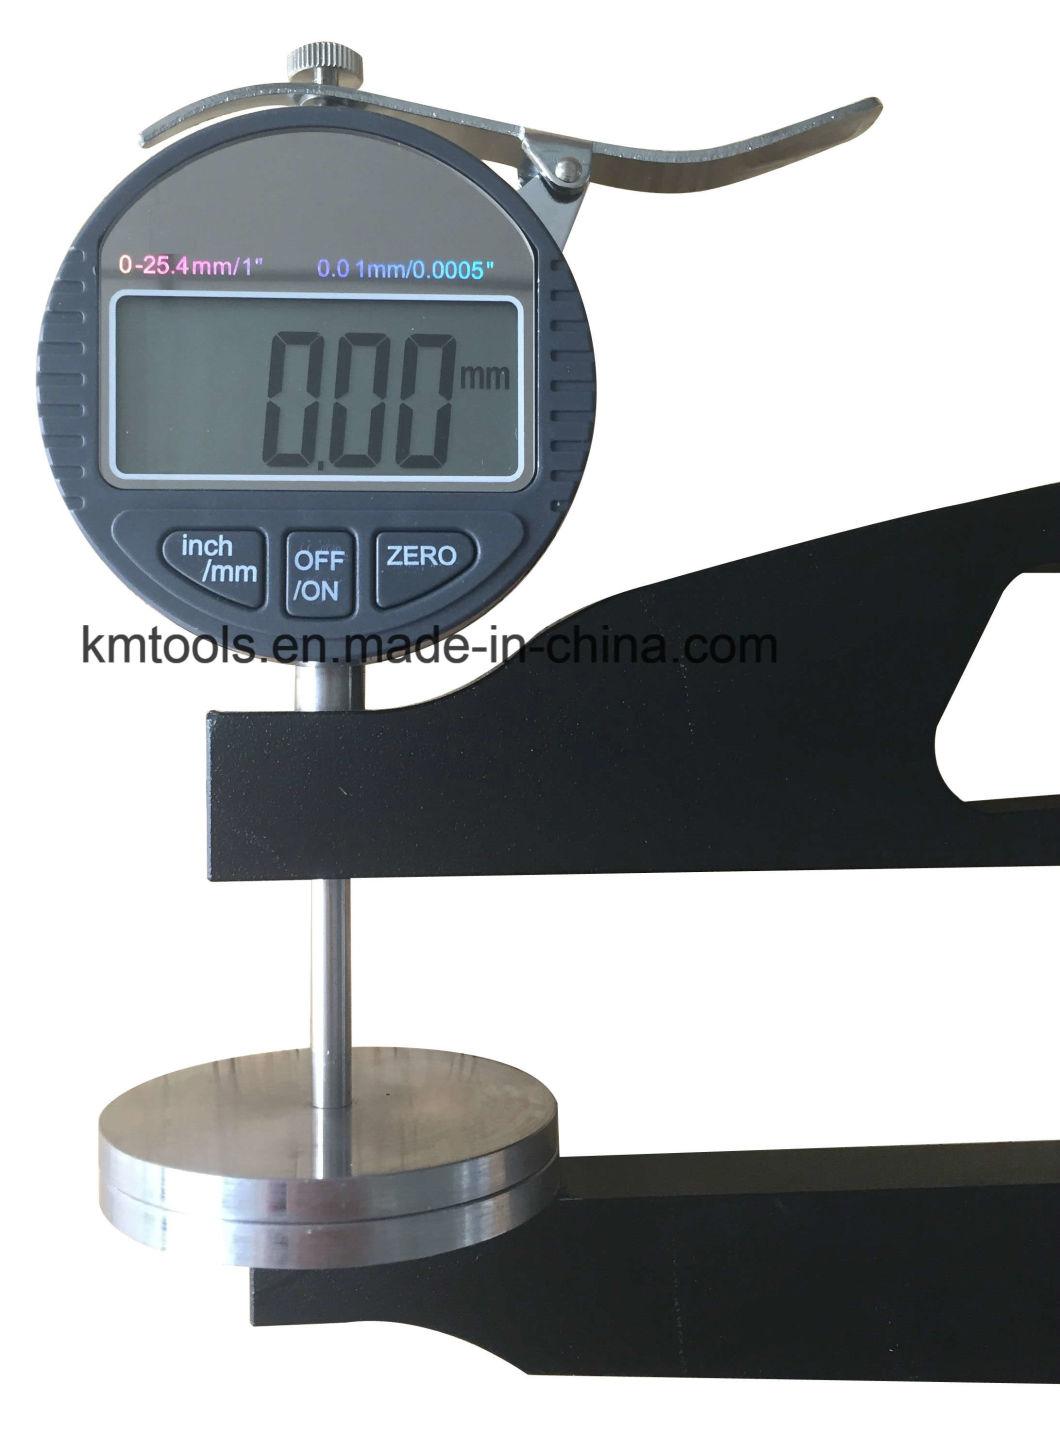 0-25.4mm/0-1′′ Digital Thickness Gauge with 300mm Measuring Depth and 50mm Measuring Diameter